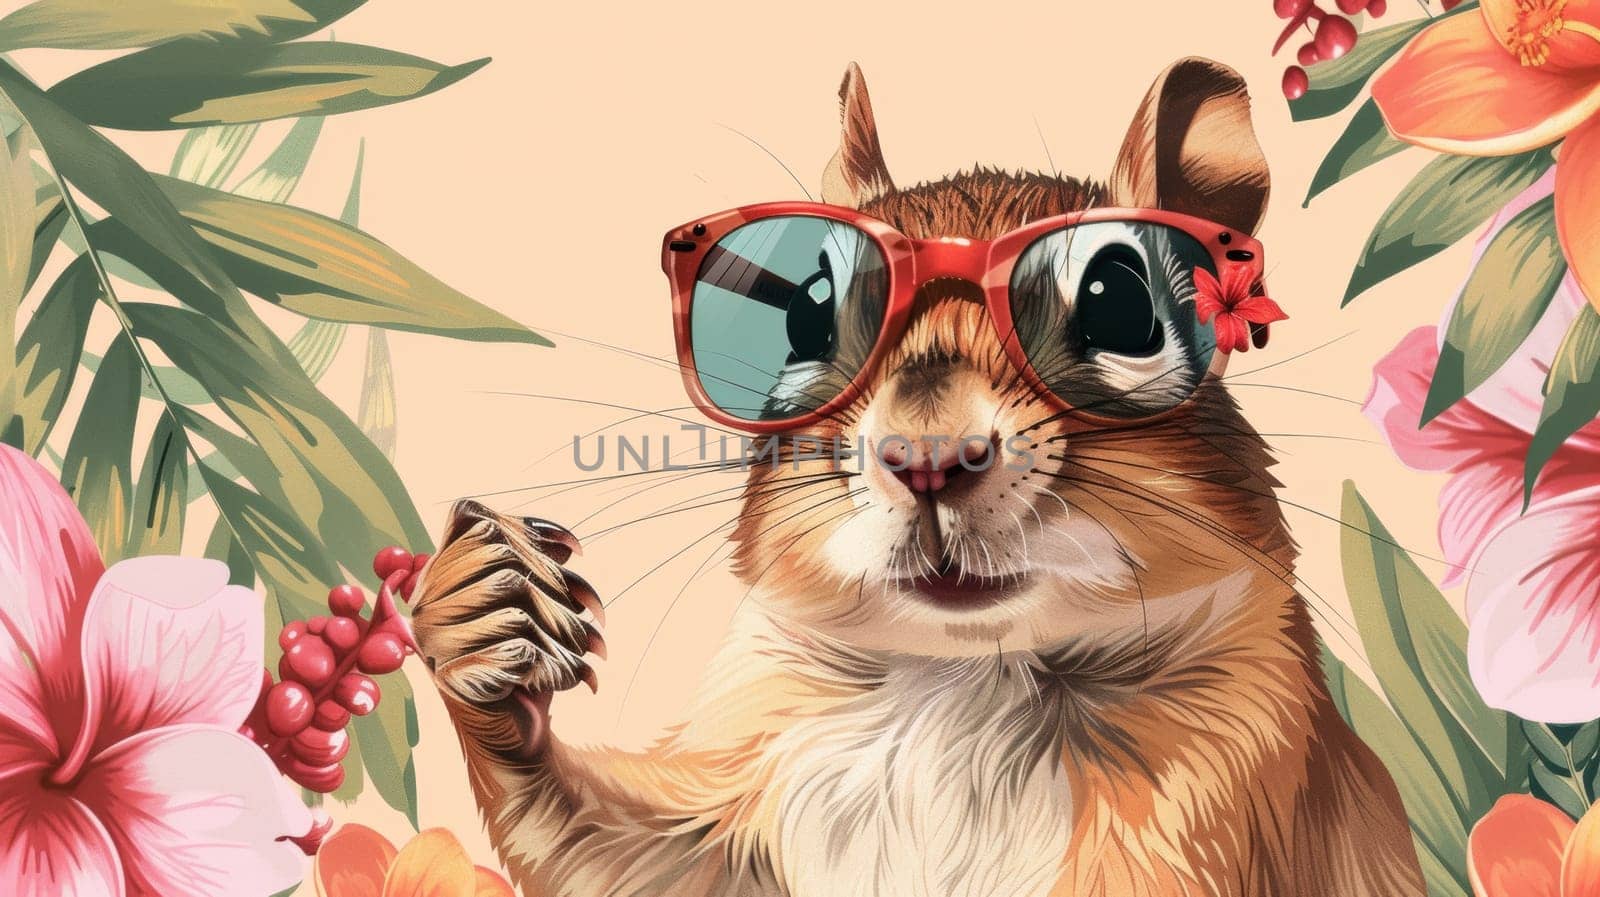 A squirrel wearing sunglasses and a flower crown with flowers, AI by starush